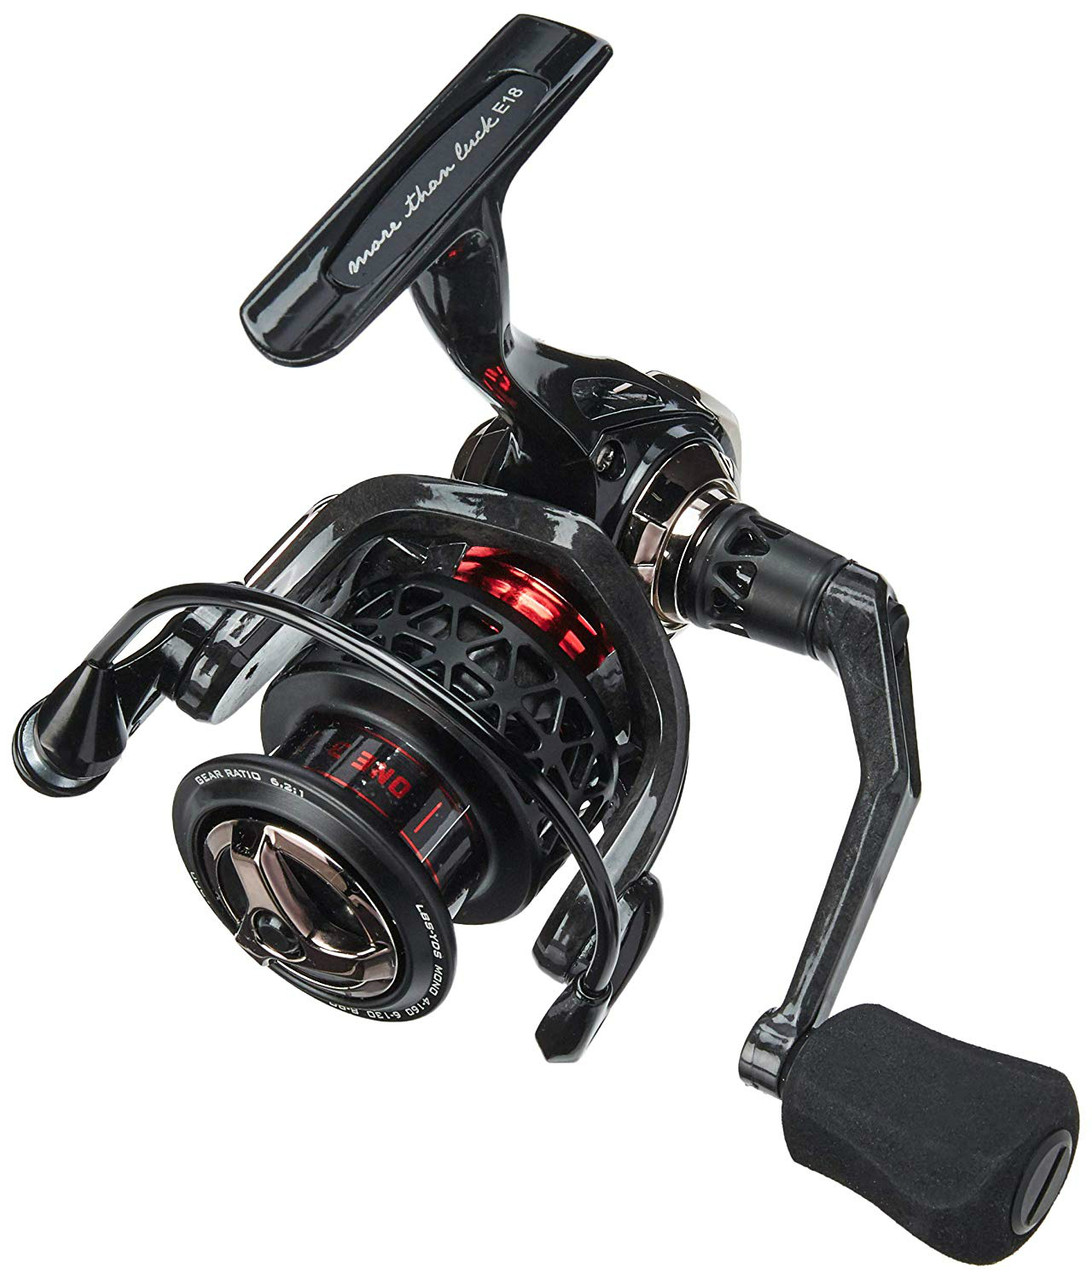 4000 size Fresh 6.2:1 Gear Ratio 13 Fishing CRGT4000 Creed GT Spinning Reel 